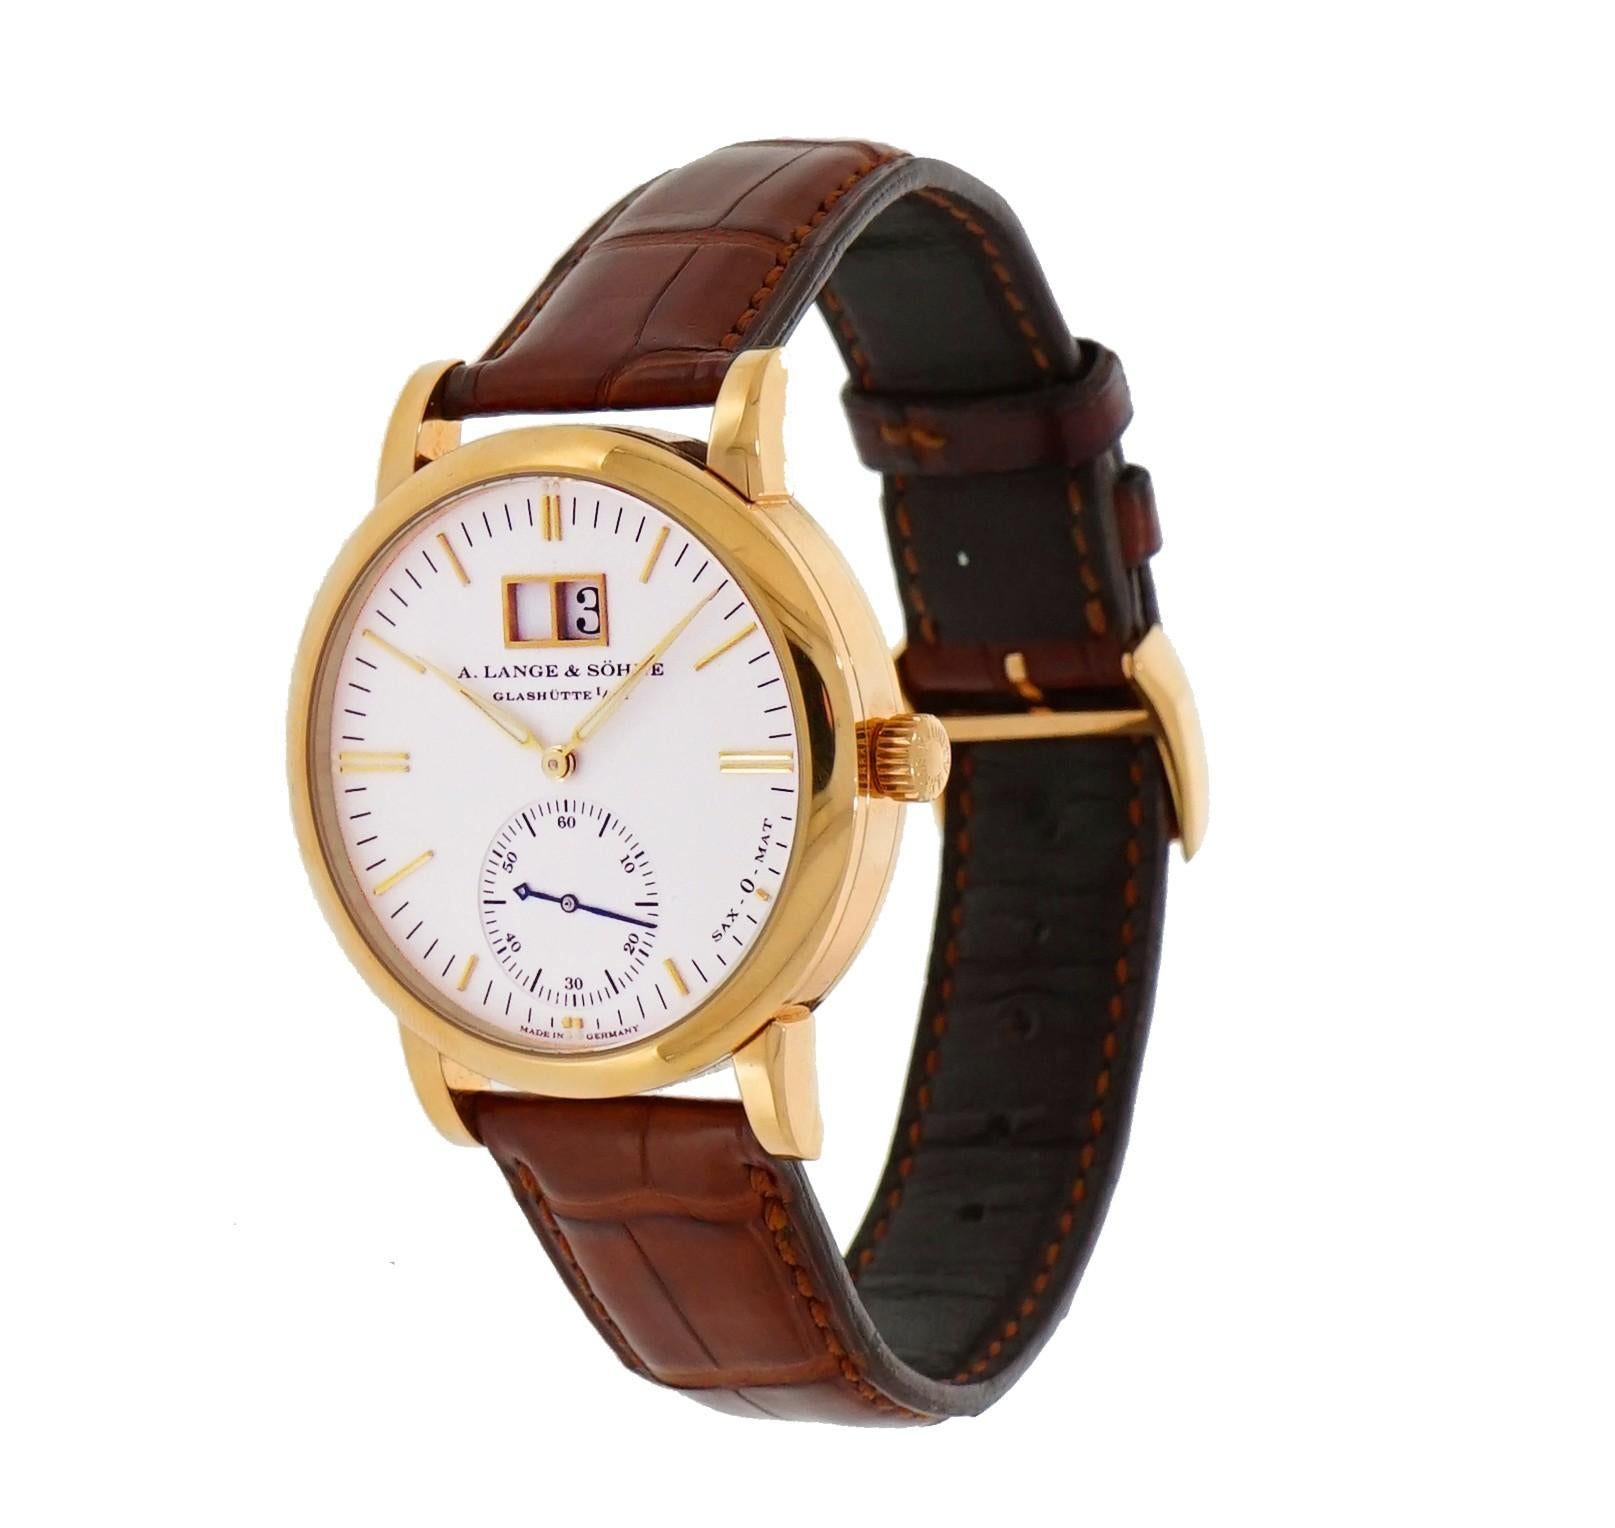 Pre-owned in excellent Condition A. Lange & Sohne, Langematic Saxonia Big date , 37 mm red gold case, automatic self-winding  caliber L921.04, 45 jewels, beating at 21,600vph,  decorated ¾  rotor in 21 karat gold and platinum, with automatic return